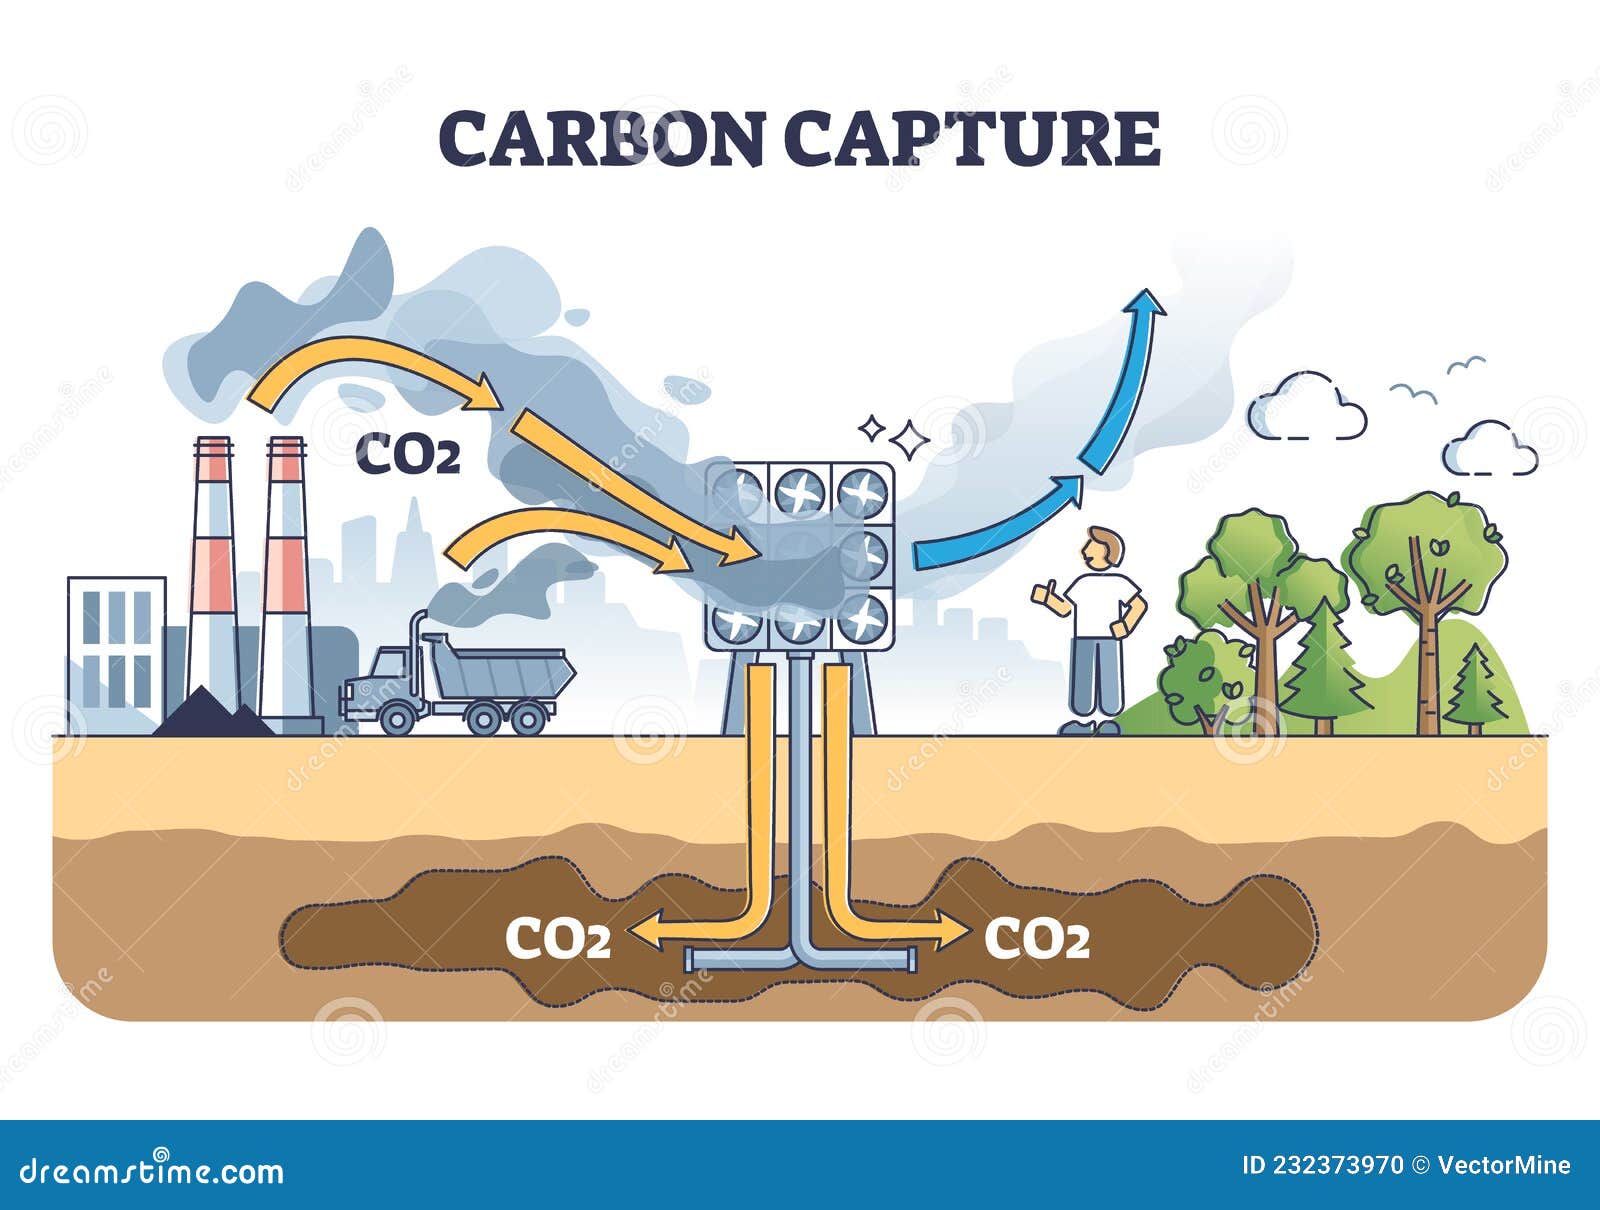 carbon capture system as co2 gas reduction with filtration outline diagram